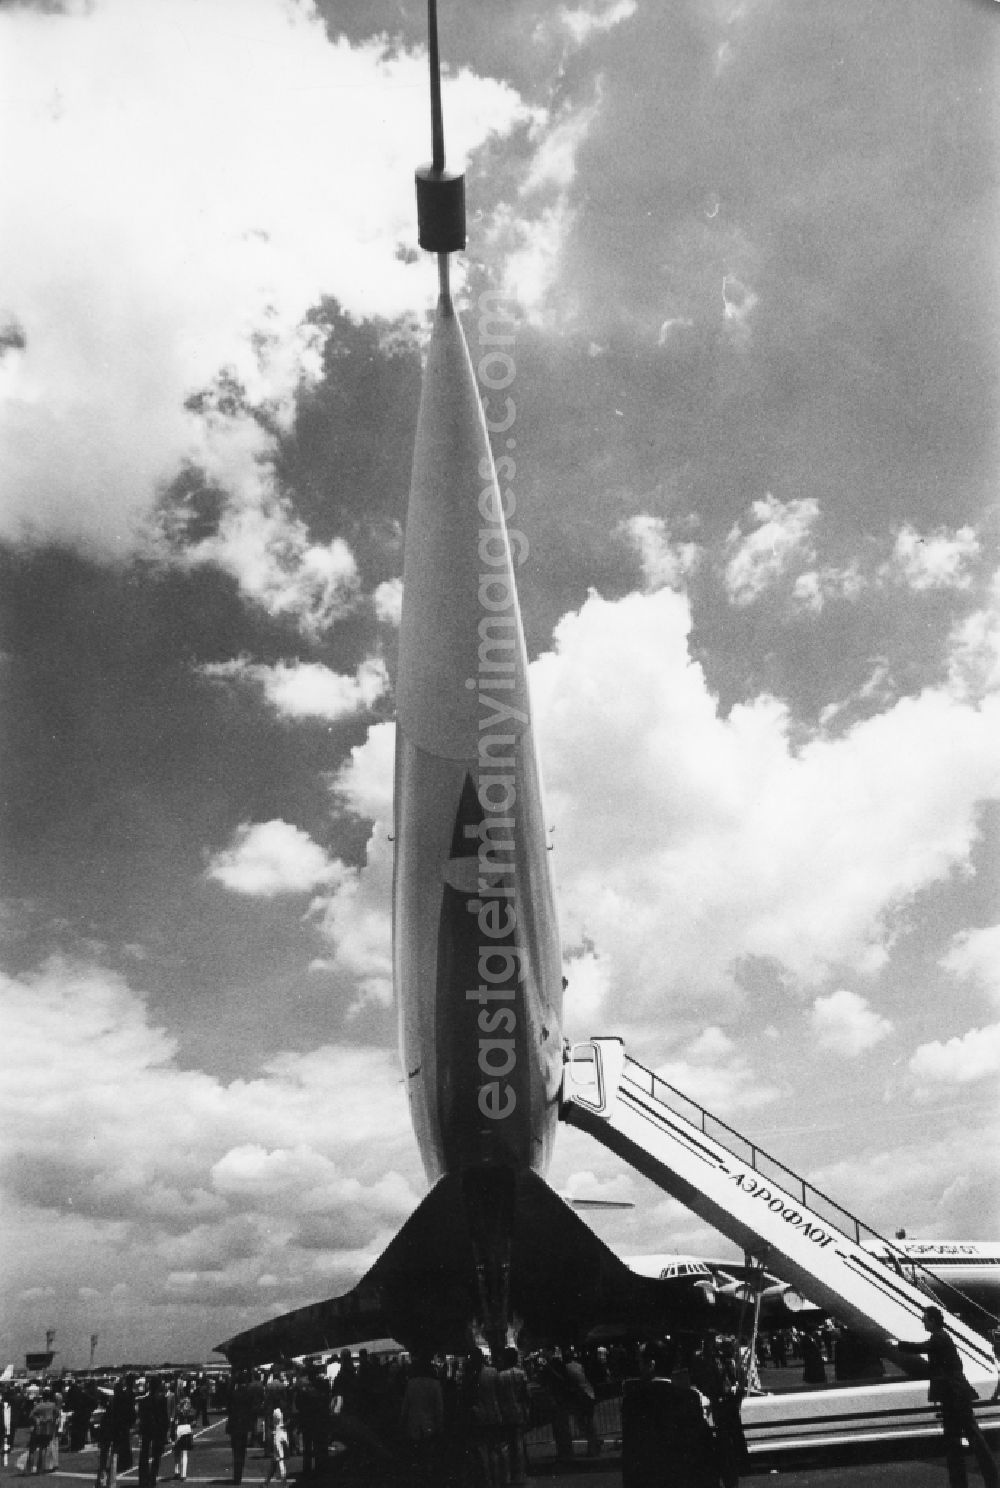 GDR image archive: Vnukovo - A TU-144 photographed from below in Vnukovo in Russia. The Tupolev TU-144 was the first supersonic airliner in the world